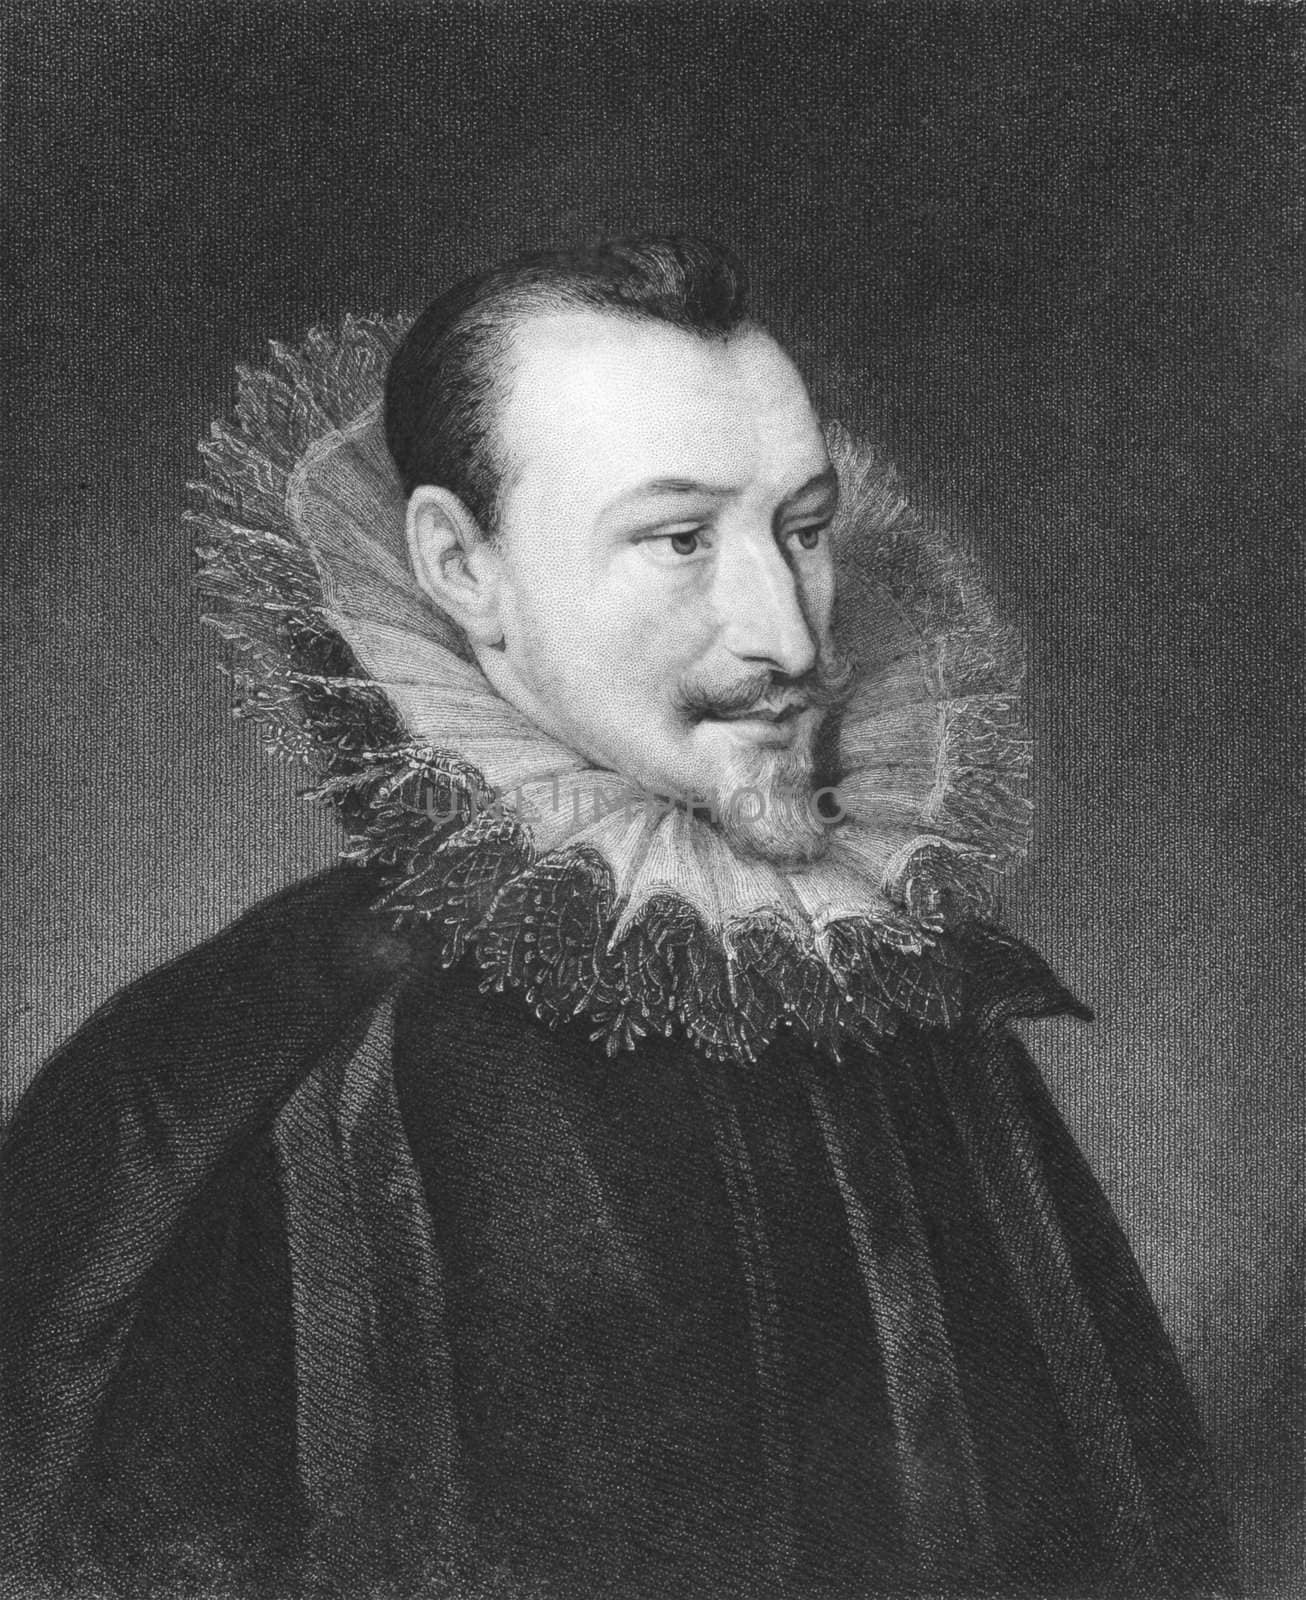 Edmund Spenser on engraving from the 1850s. 16th century english poet.